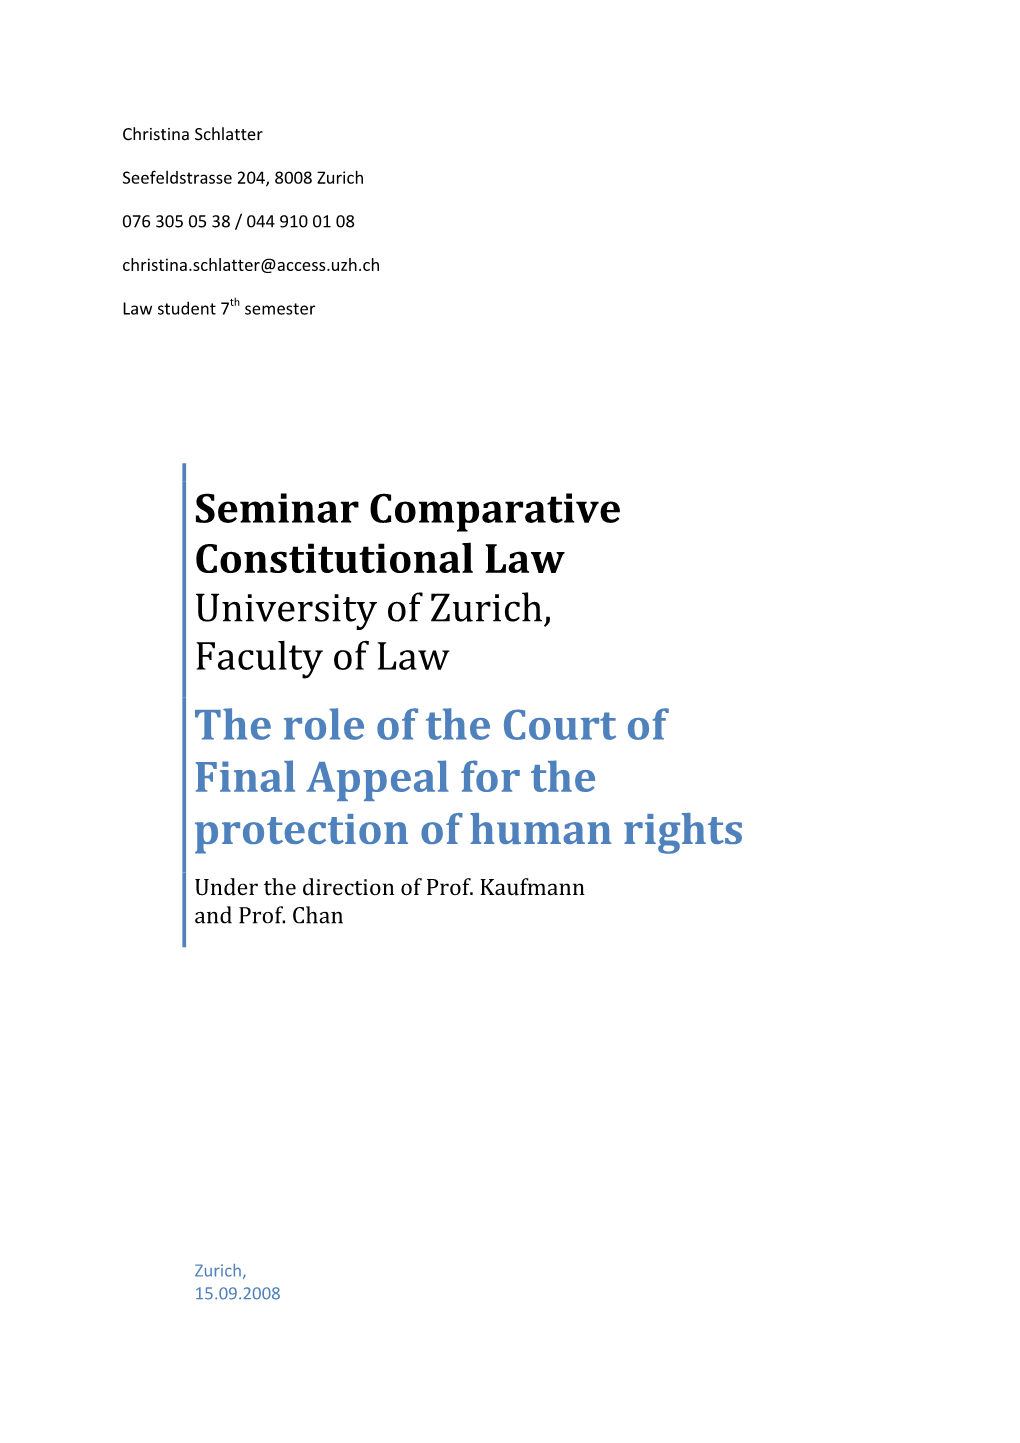 The Role of the Court of Final Appeal for the Protection of Human Rights Under the Direction of Prof